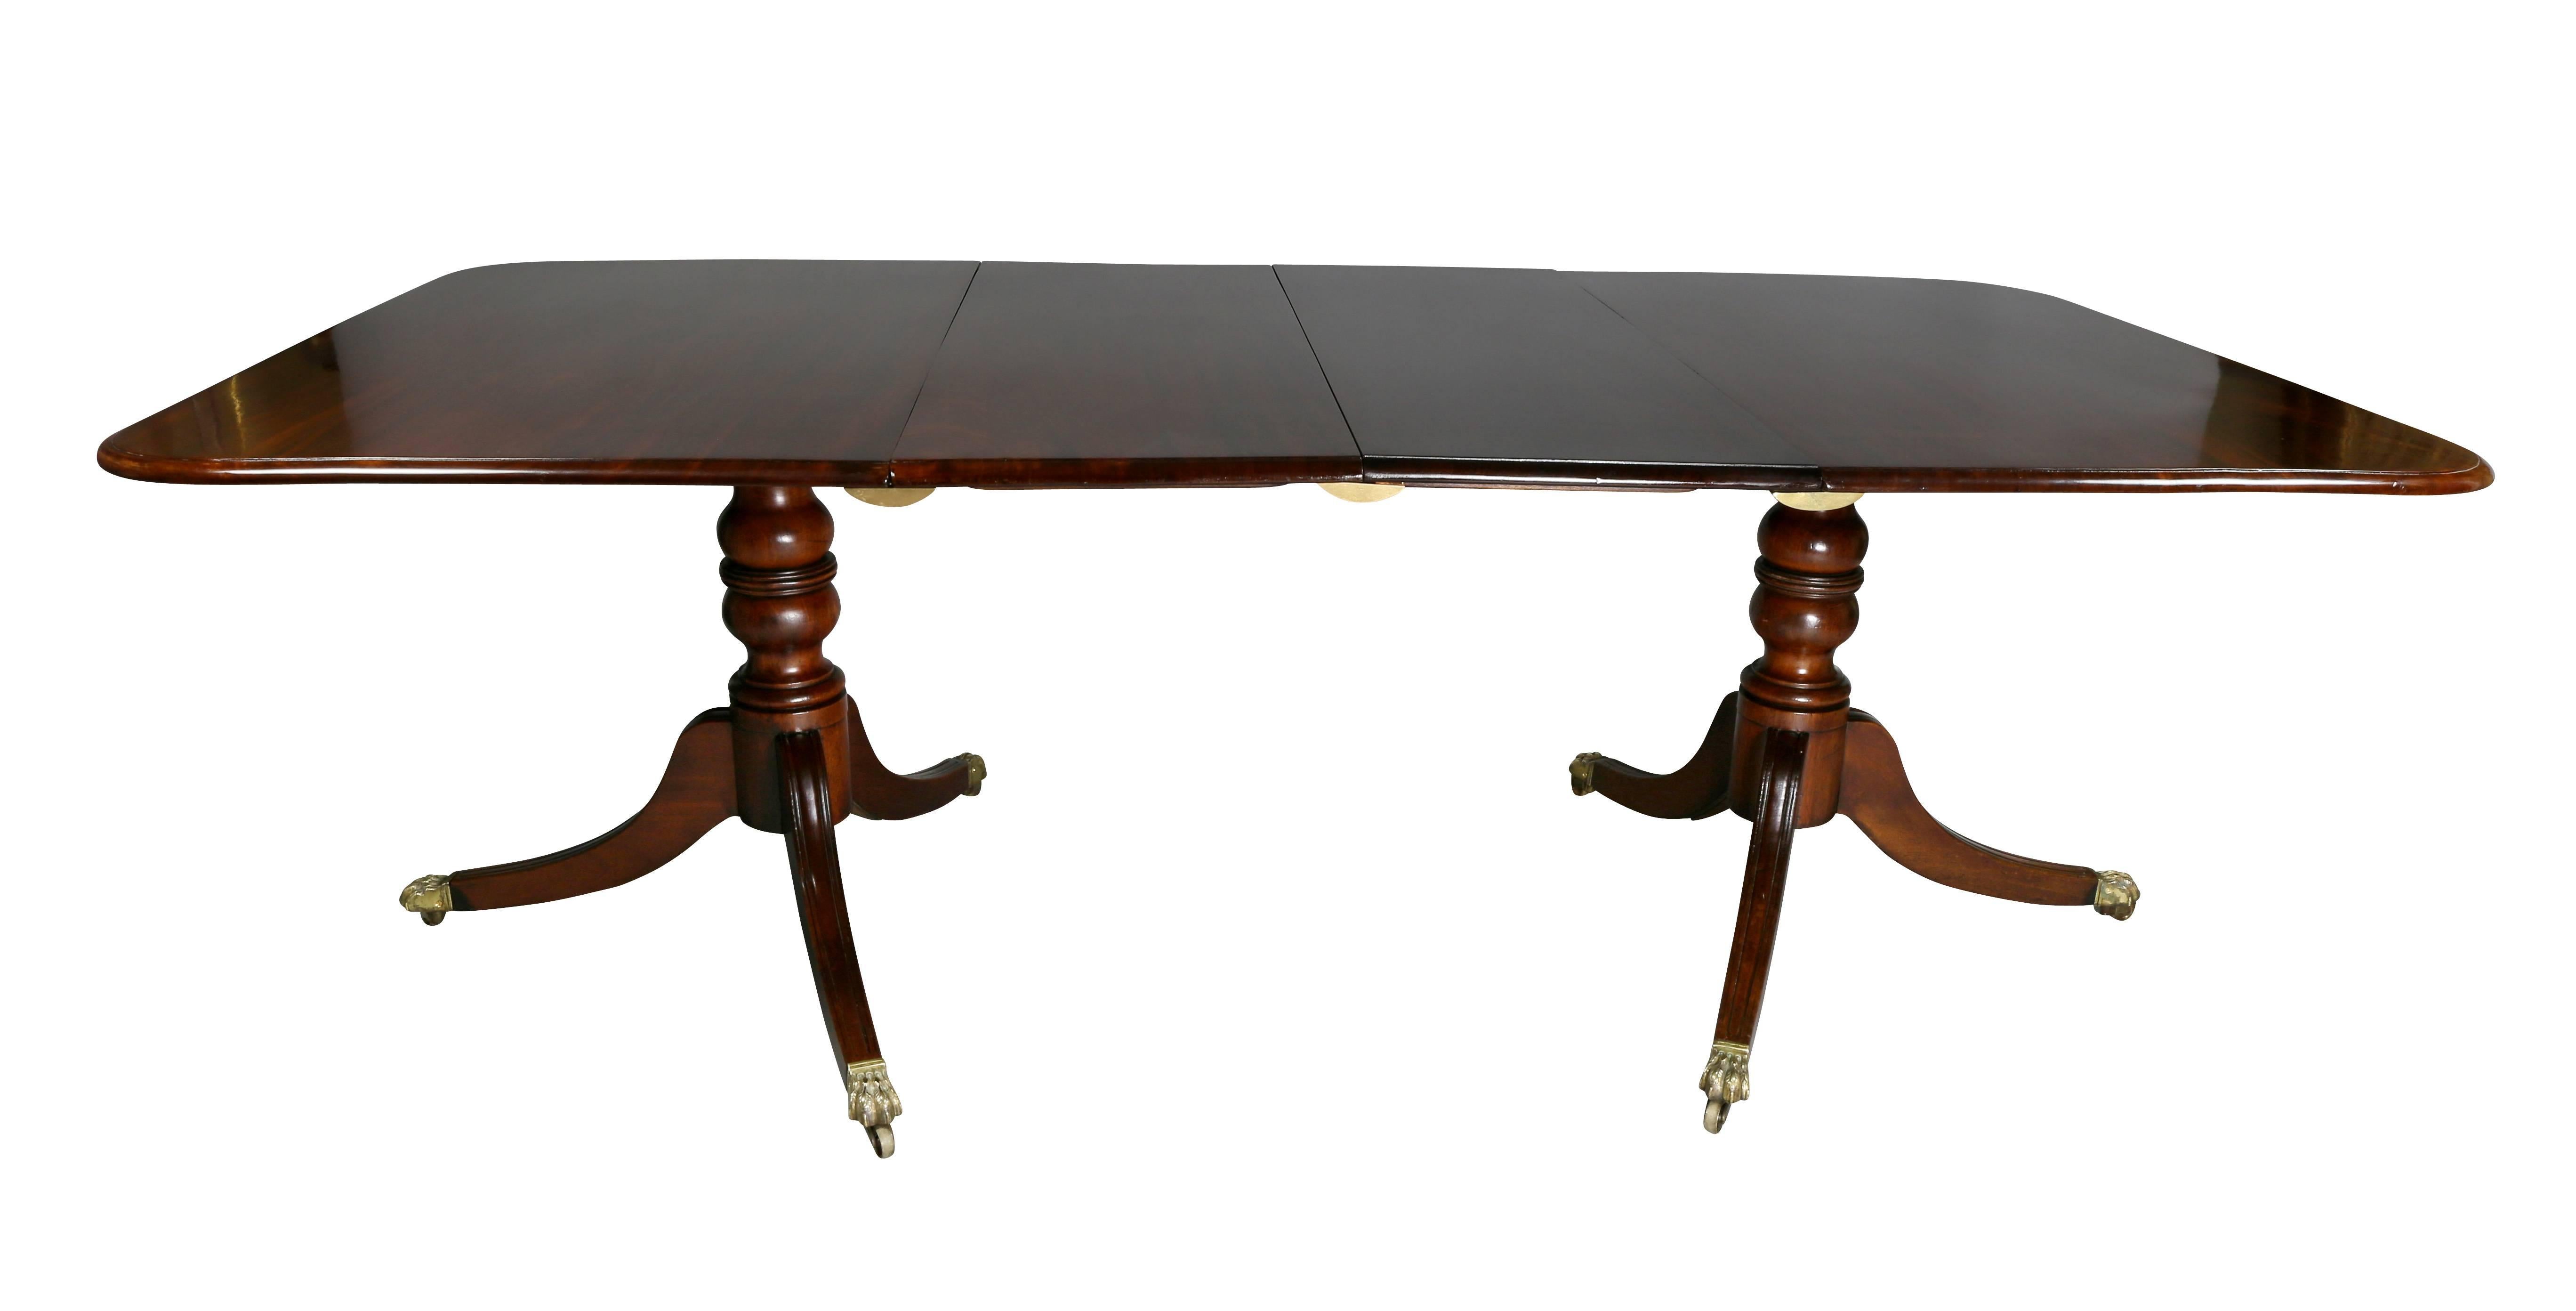 Rectangular top with molded edge. Including two leaves. Raised on turned supports ending on saber legs and casters.